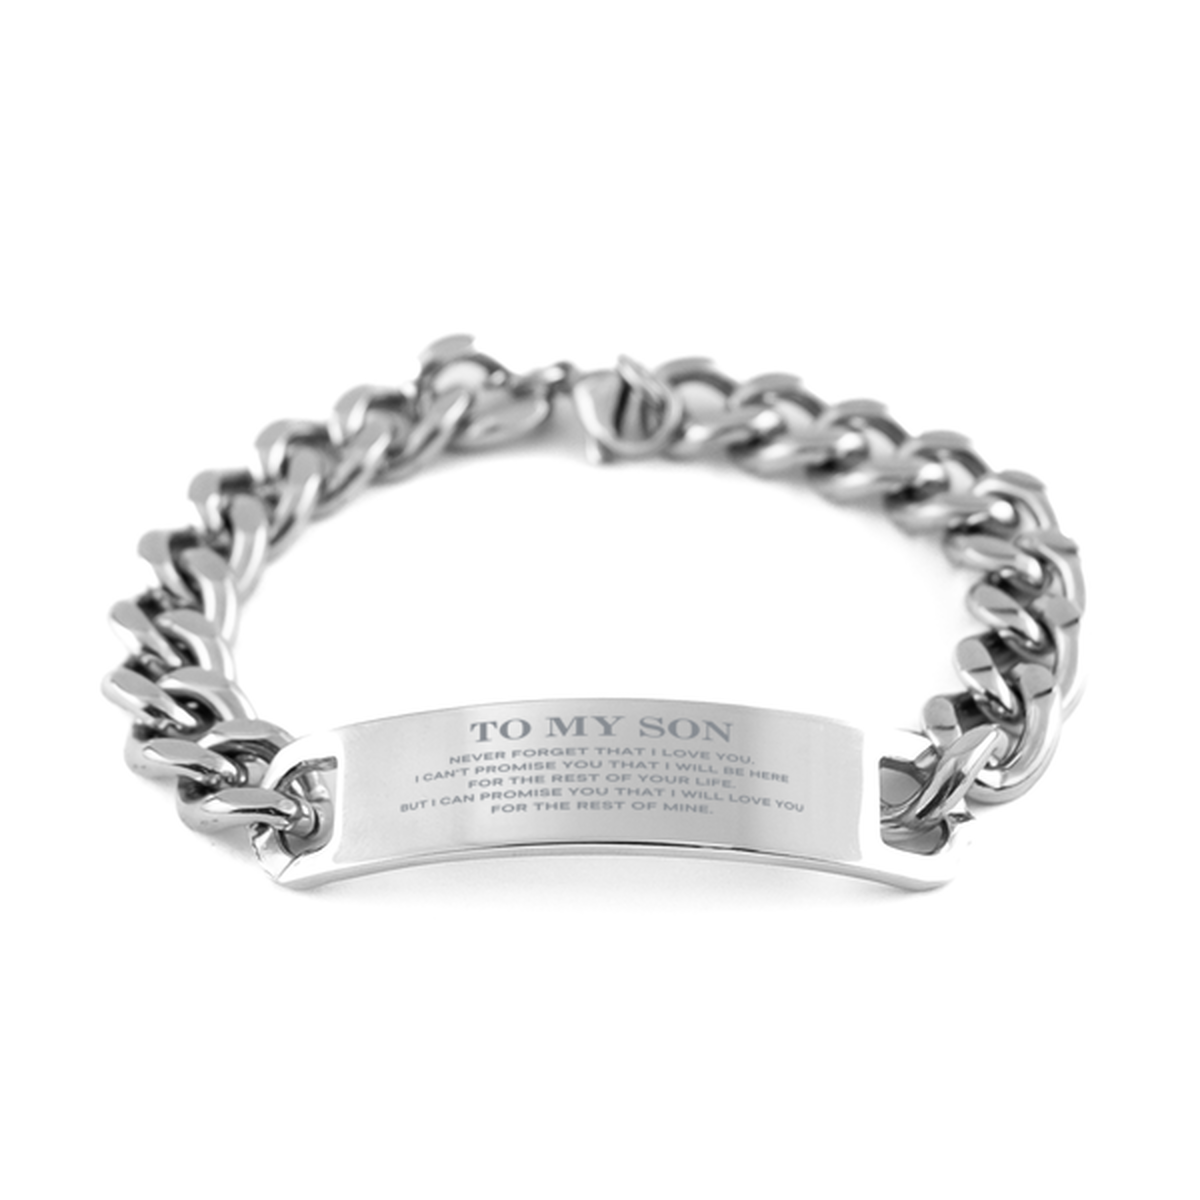 To My Son Gifts, I will love you for the rest of mine, Love Son Bracelet, Birthday Christmas Unique Cuban Chain Stainless Steel Bracelet For Son